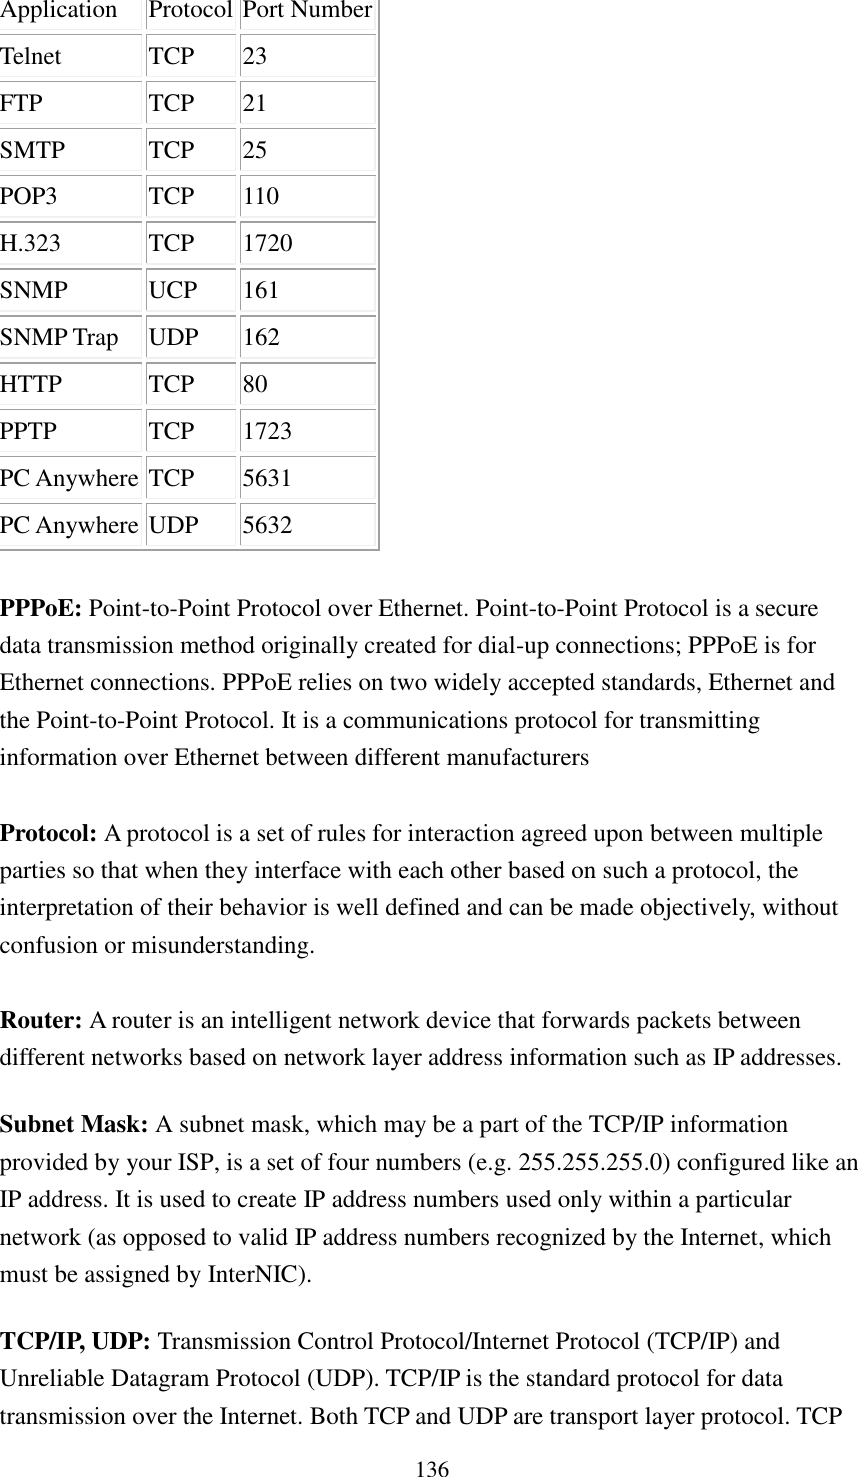 136 Application Protocol Port Number Telnet TCP 23 FTP TCP 21 SMTP TCP 25 POP3 TCP 110 H.323 TCP 1720 SNMP UCP 161 SNMP Trap UDP 162 HTTP TCP 80 PPTP TCP 1723 PC Anywhere TCP 5631 PC Anywhere UDP 5632  PPPoE: Point-to-Point Protocol over Ethernet. Point-to-Point Protocol is a secure data transmission method originally created for dial-up connections; PPPoE is for Ethernet connections. PPPoE relies on two widely accepted standards, Ethernet and the Point-to-Point Protocol. It is a communications protocol for transmitting information over Ethernet between different manufacturers  Protocol: A protocol is a set of rules for interaction agreed upon between multiple parties so that when they interface with each other based on such a protocol, the interpretation of their behavior is well defined and can be made objectively, without confusion or misunderstanding.    Router: A router is an intelligent network device that forwards packets between different networks based on network layer address information such as IP addresses. Subnet Mask: A subnet mask, which may be a part of the TCP/IP information provided by your ISP, is a set of four numbers (e.g. 255.255.255.0) configured like an IP address. It is used to create IP address numbers used only within a particular network (as opposed to valid IP address numbers recognized by the Internet, which must be assigned by InterNIC).   TCP/IP, UDP: Transmission Control Protocol/Internet Protocol (TCP/IP) and Unreliable Datagram Protocol (UDP). TCP/IP is the standard protocol for data transmission over the Internet. Both TCP and UDP are transport layer protocol. TCP 